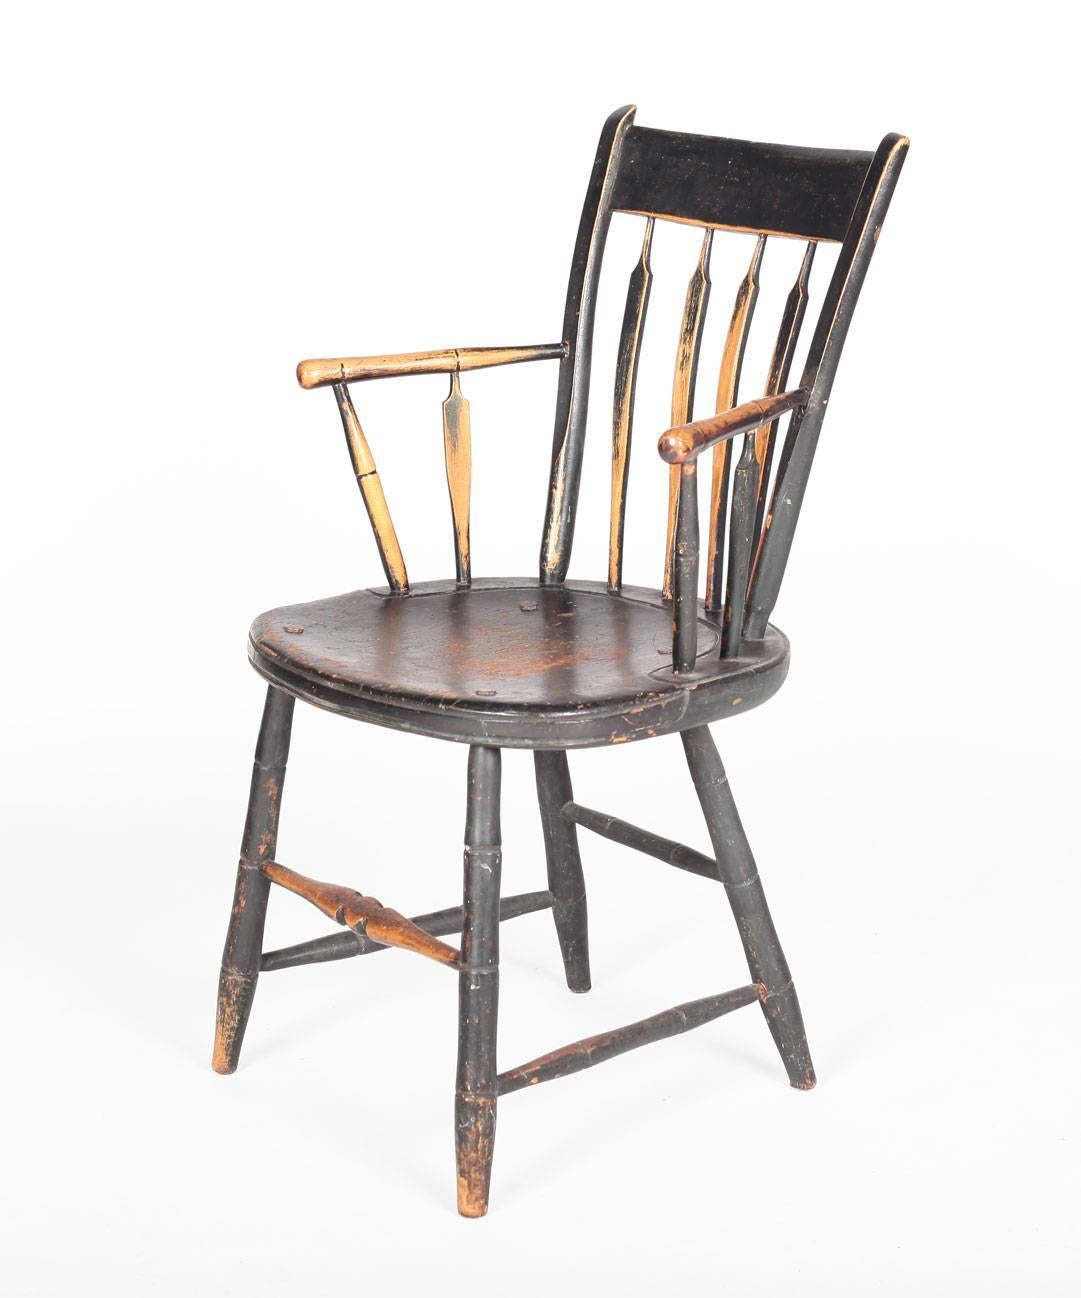 An American windsor chair featuring the original paint, dating to the 19th century. The chair measures 20 inches wide by 17 inches deep and 33 inches high.